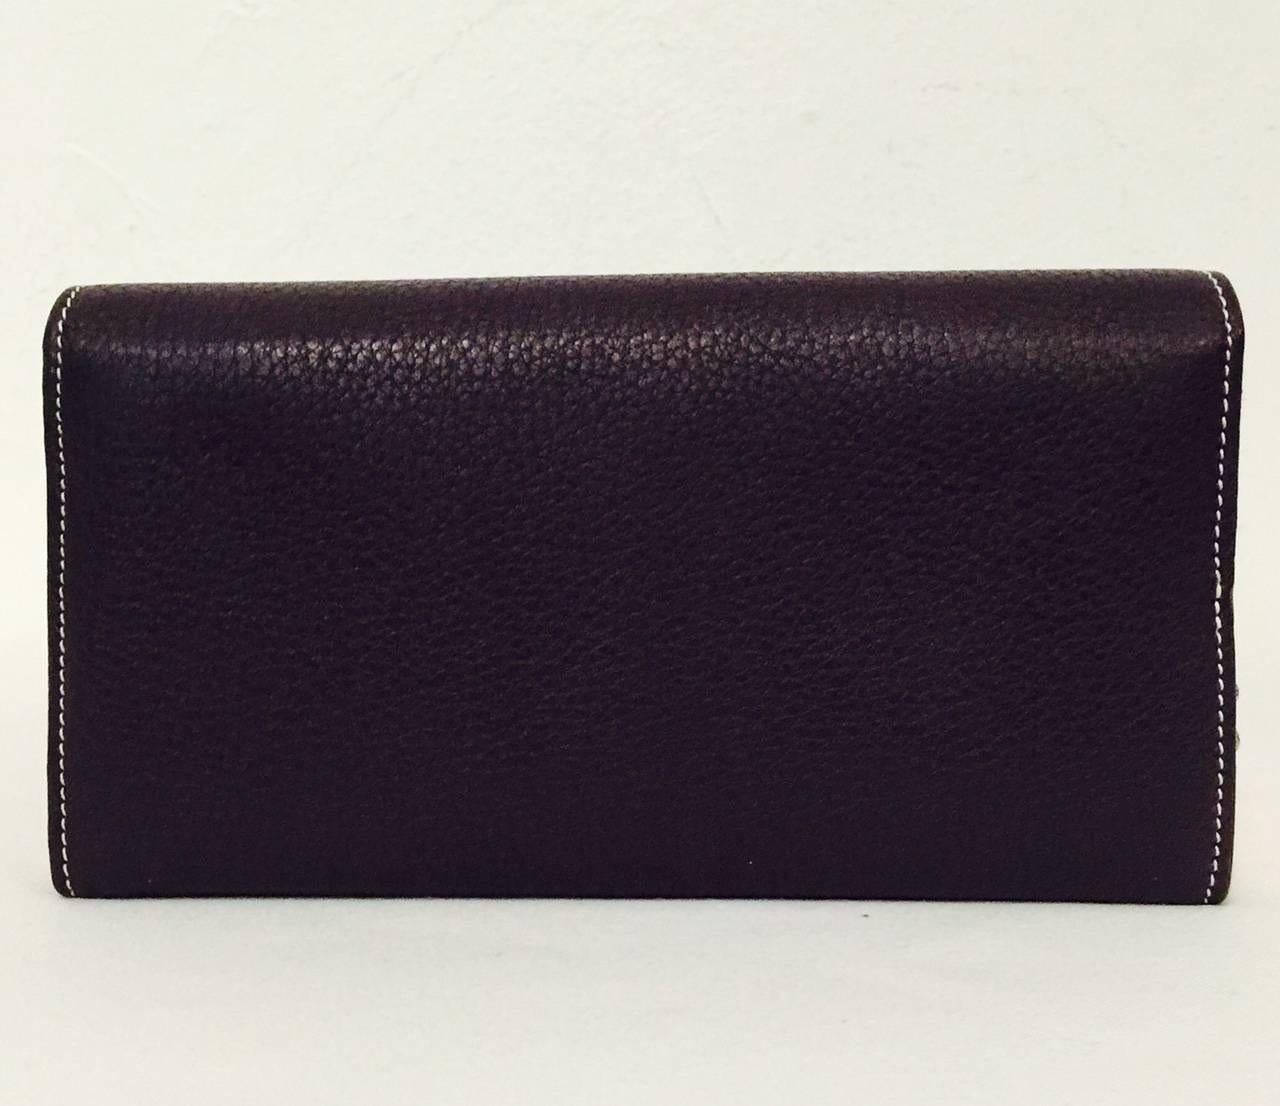 Black Tiffany & Co. Aubergine Grained Leather Small City Clutch Above Excellent 